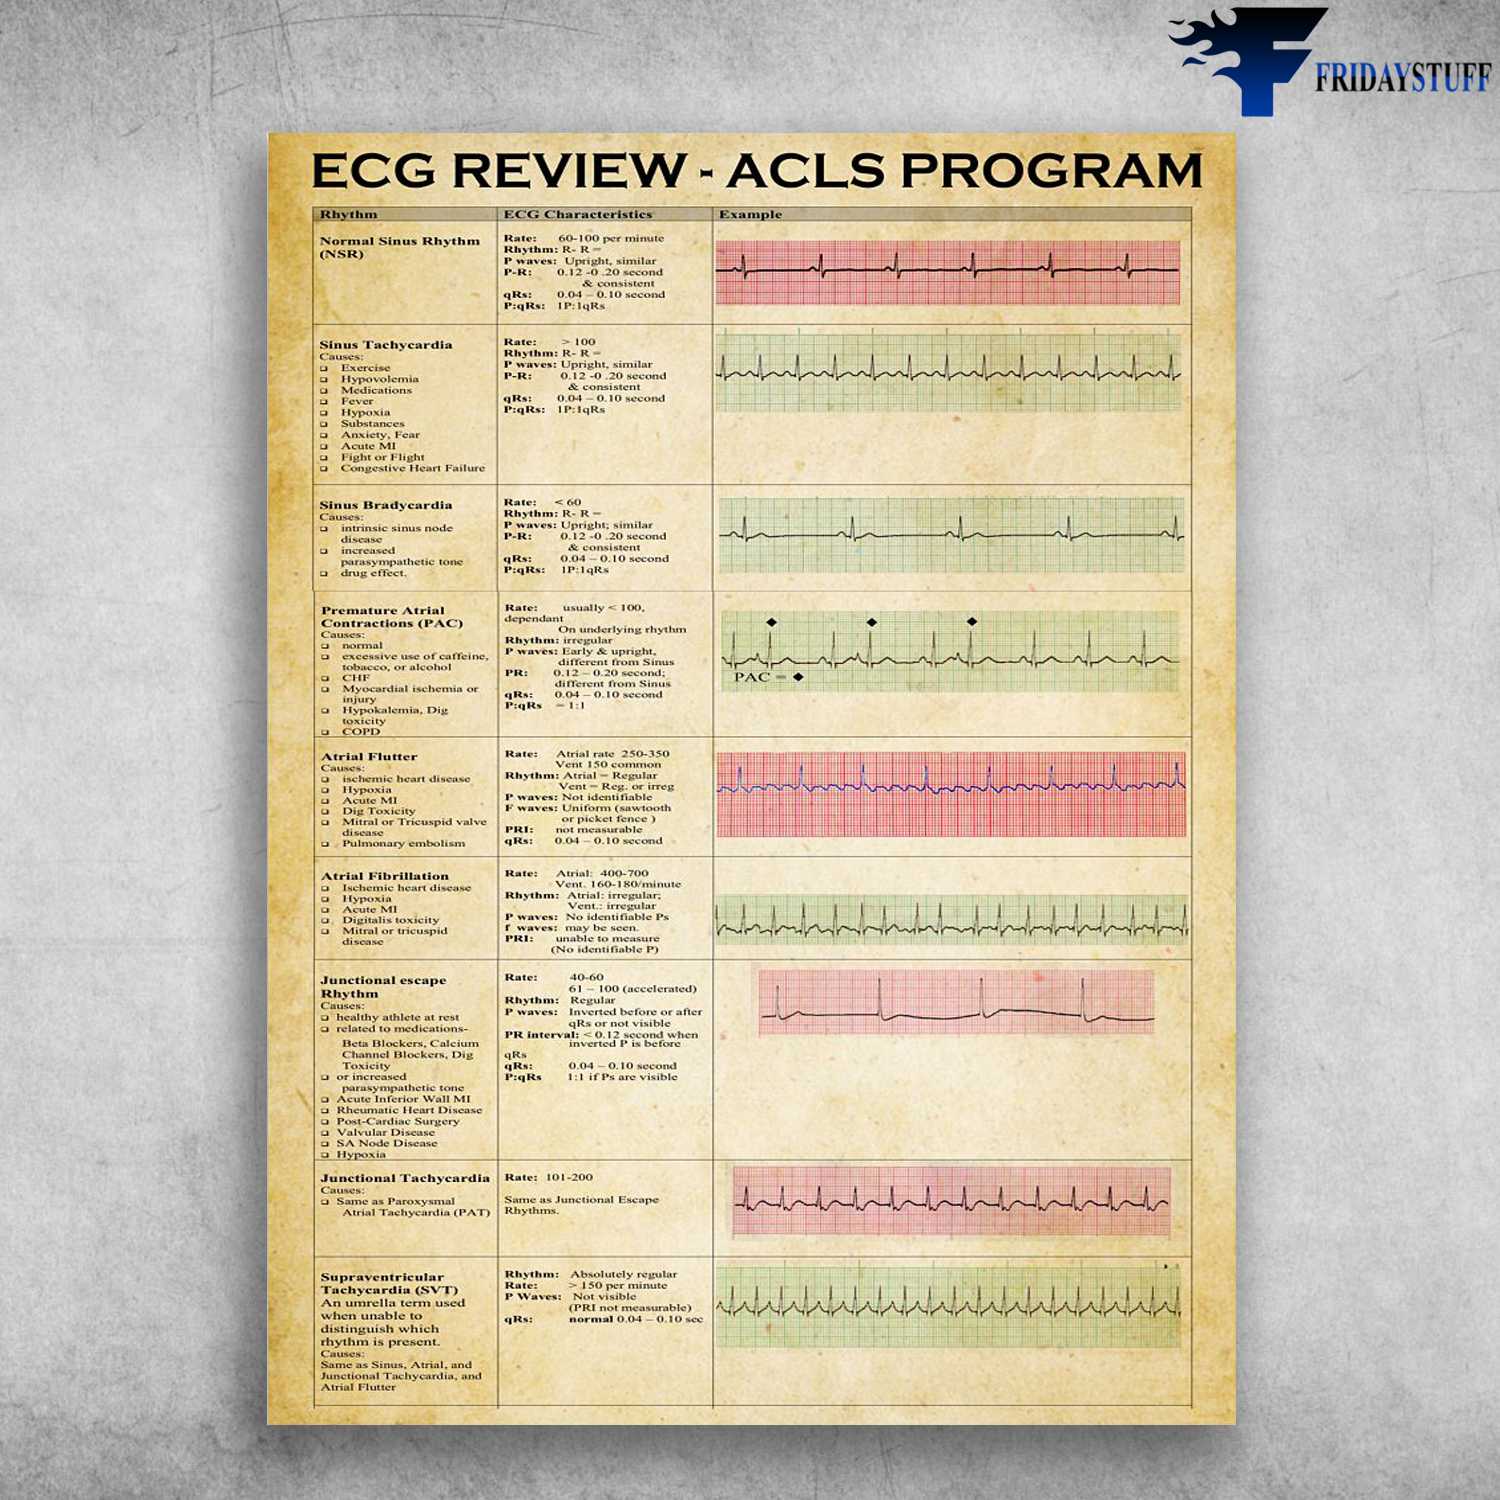 ECG Review - ACLS Program, Electrocardiogram Knowledge, Advanced Cardiovascular Life Support